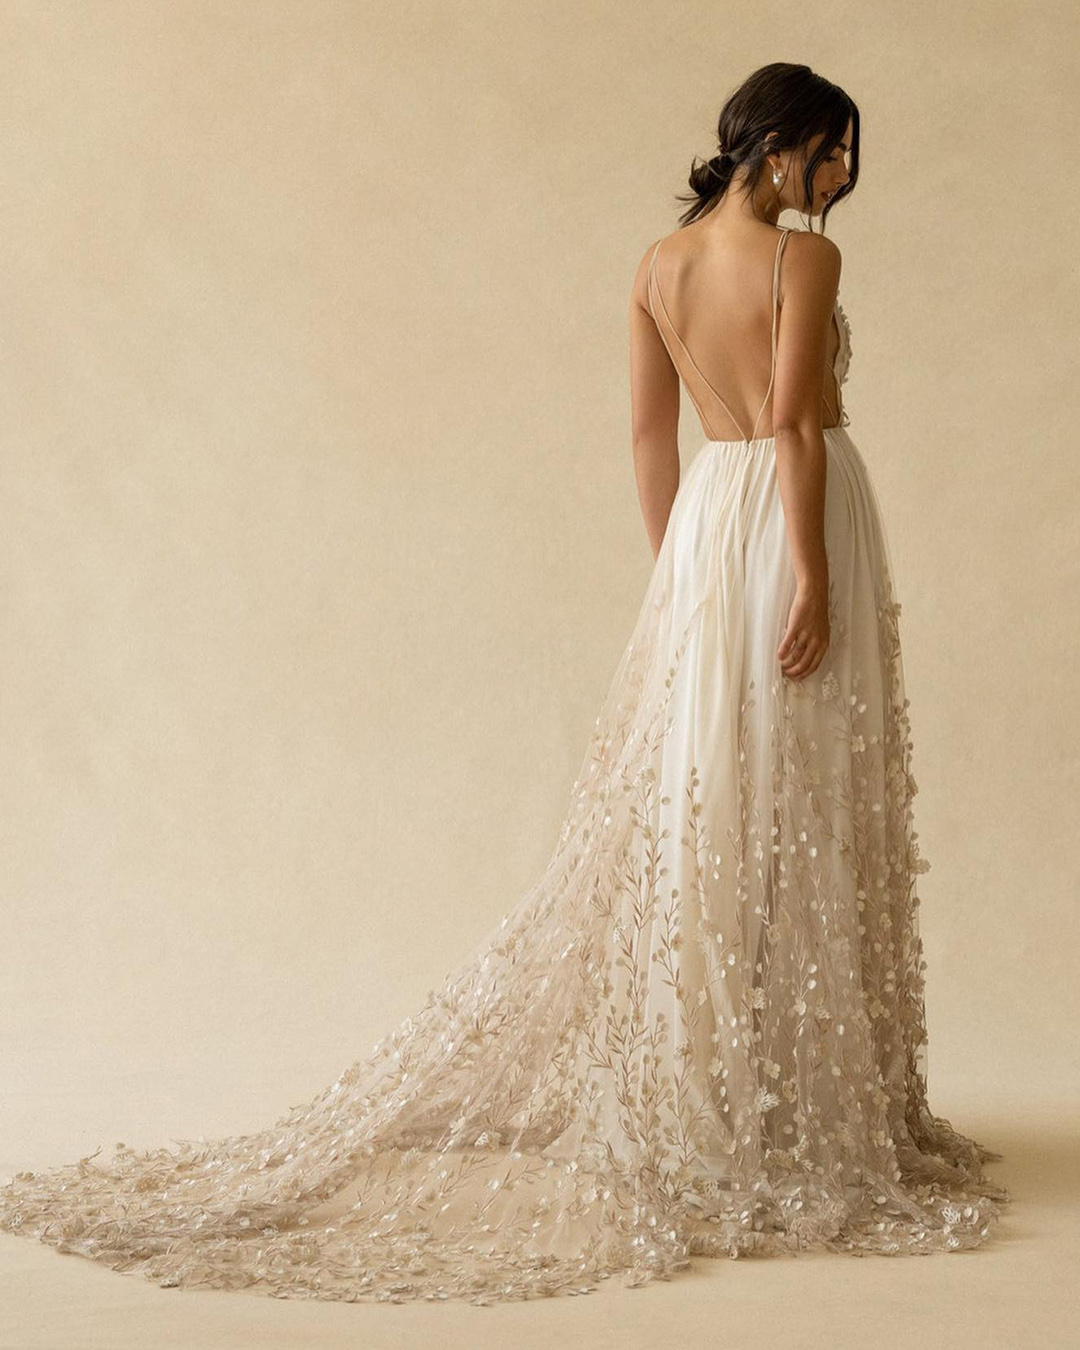 destination wedding dresses a line backless with spaghetti straps floral appliques alessandro grecco